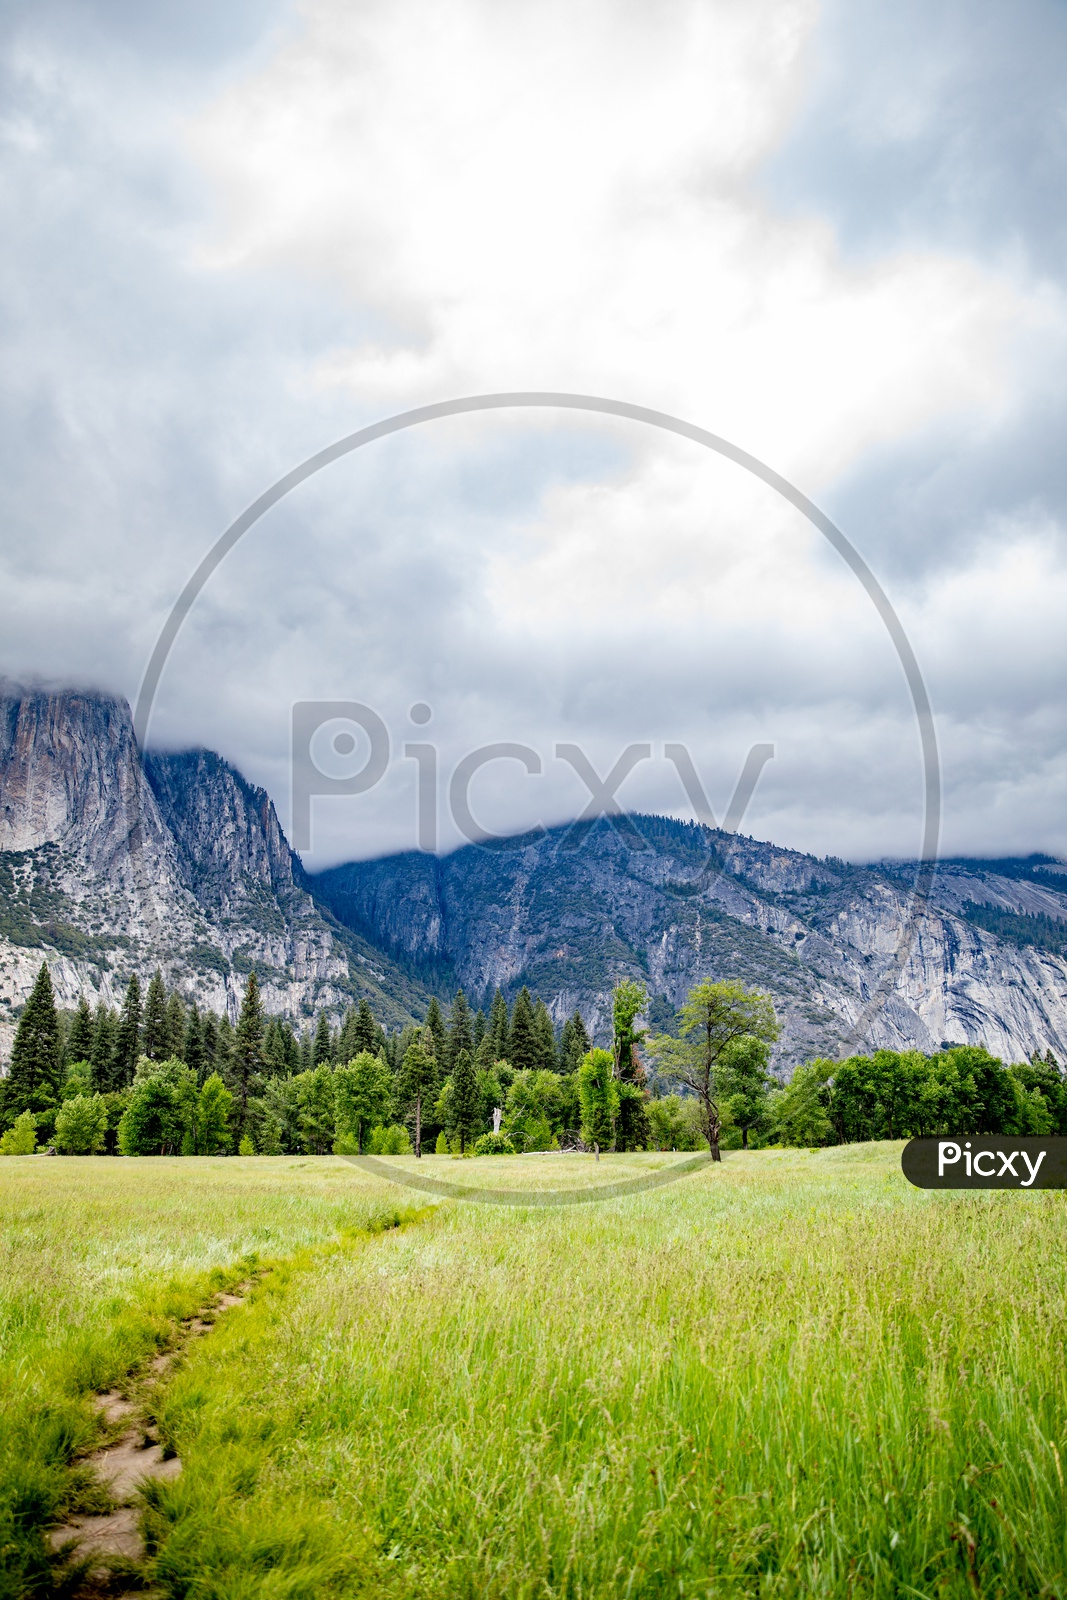 A Beautiful Composition Shot Of a Mountains In Yosemite Valley With Water fall , Mountains , Fields In Foreground and Sky With Clouds